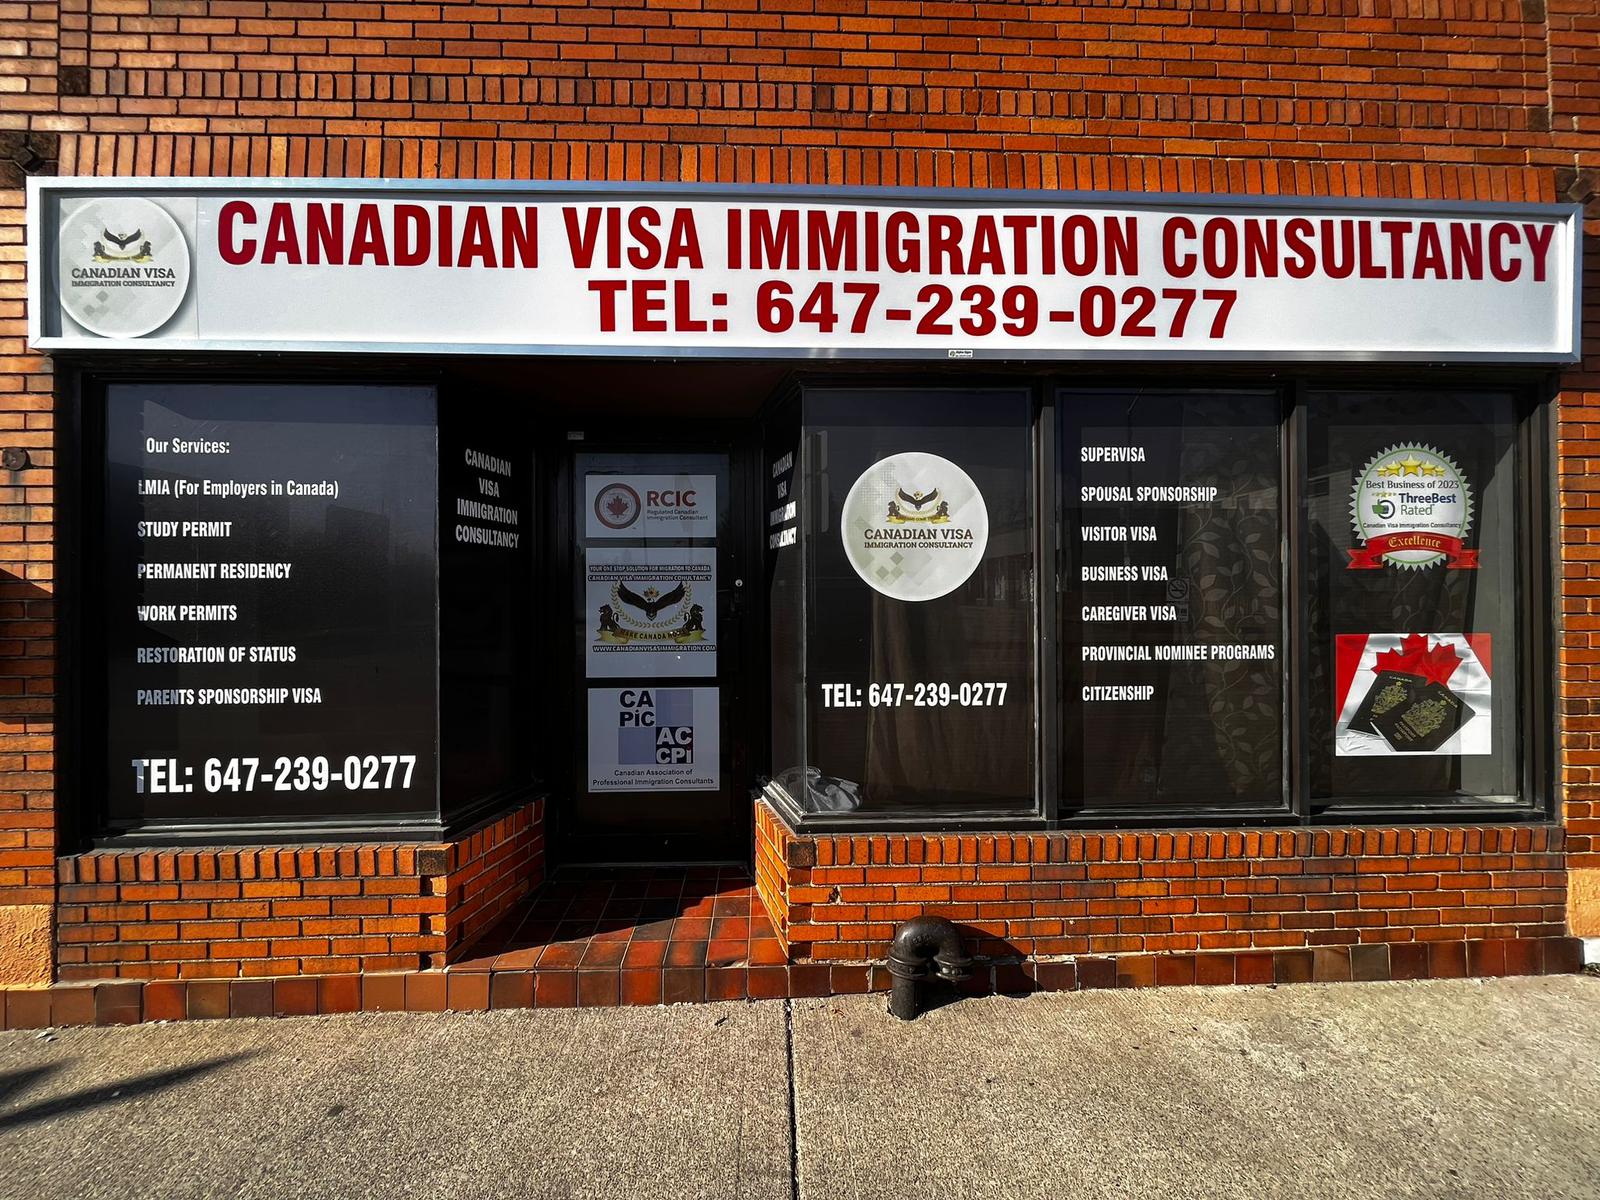 Canadian Visa Immigration Consultancy – Mr. Kumar MBA, RCIC, CAPIC Member, Commissioner of Oaths